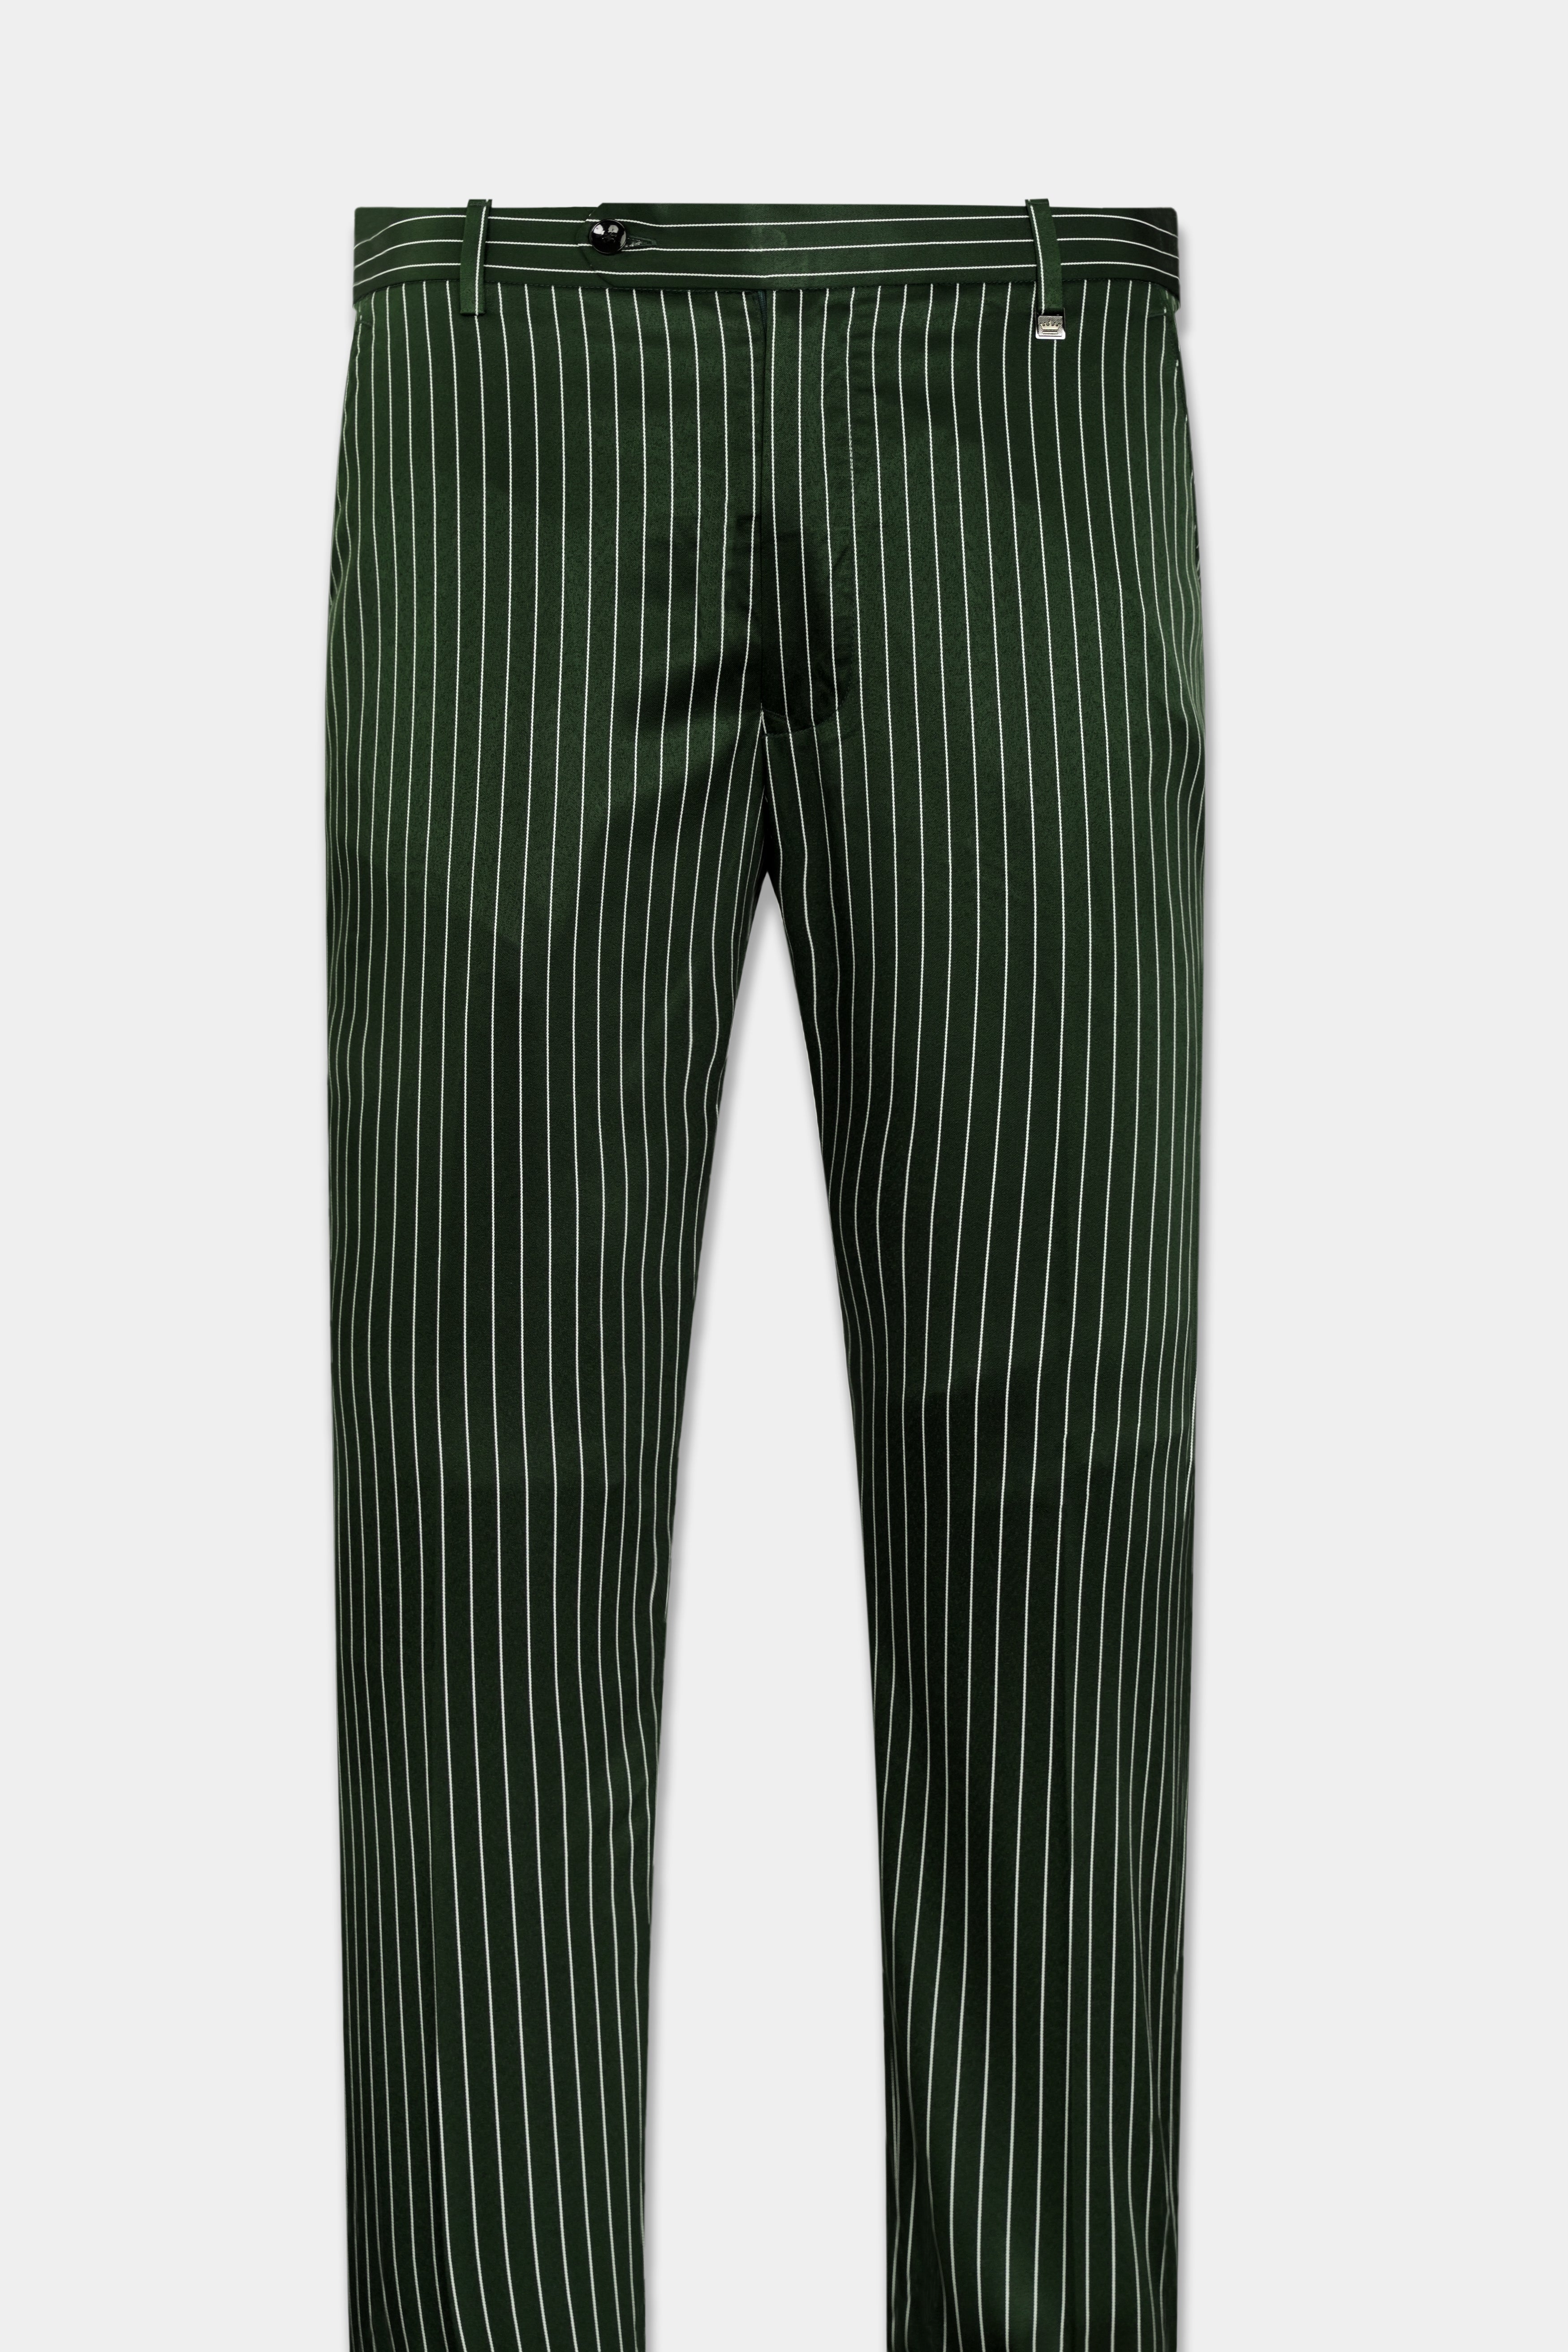 Myrtle Green and White Striped Wool Rich Suit ST3086-SB-36, ST3086-SB-38, ST3086-SB-40, ST3086-SB-42, ST3086-SB-44, ST3086-SB-46, ST3086-SB-48, ST3086-SB-50, ST3086-SB-52, ST3086-SB-54, ST3086-SB-56, ST3086-SB-58, ST3086-SB-60